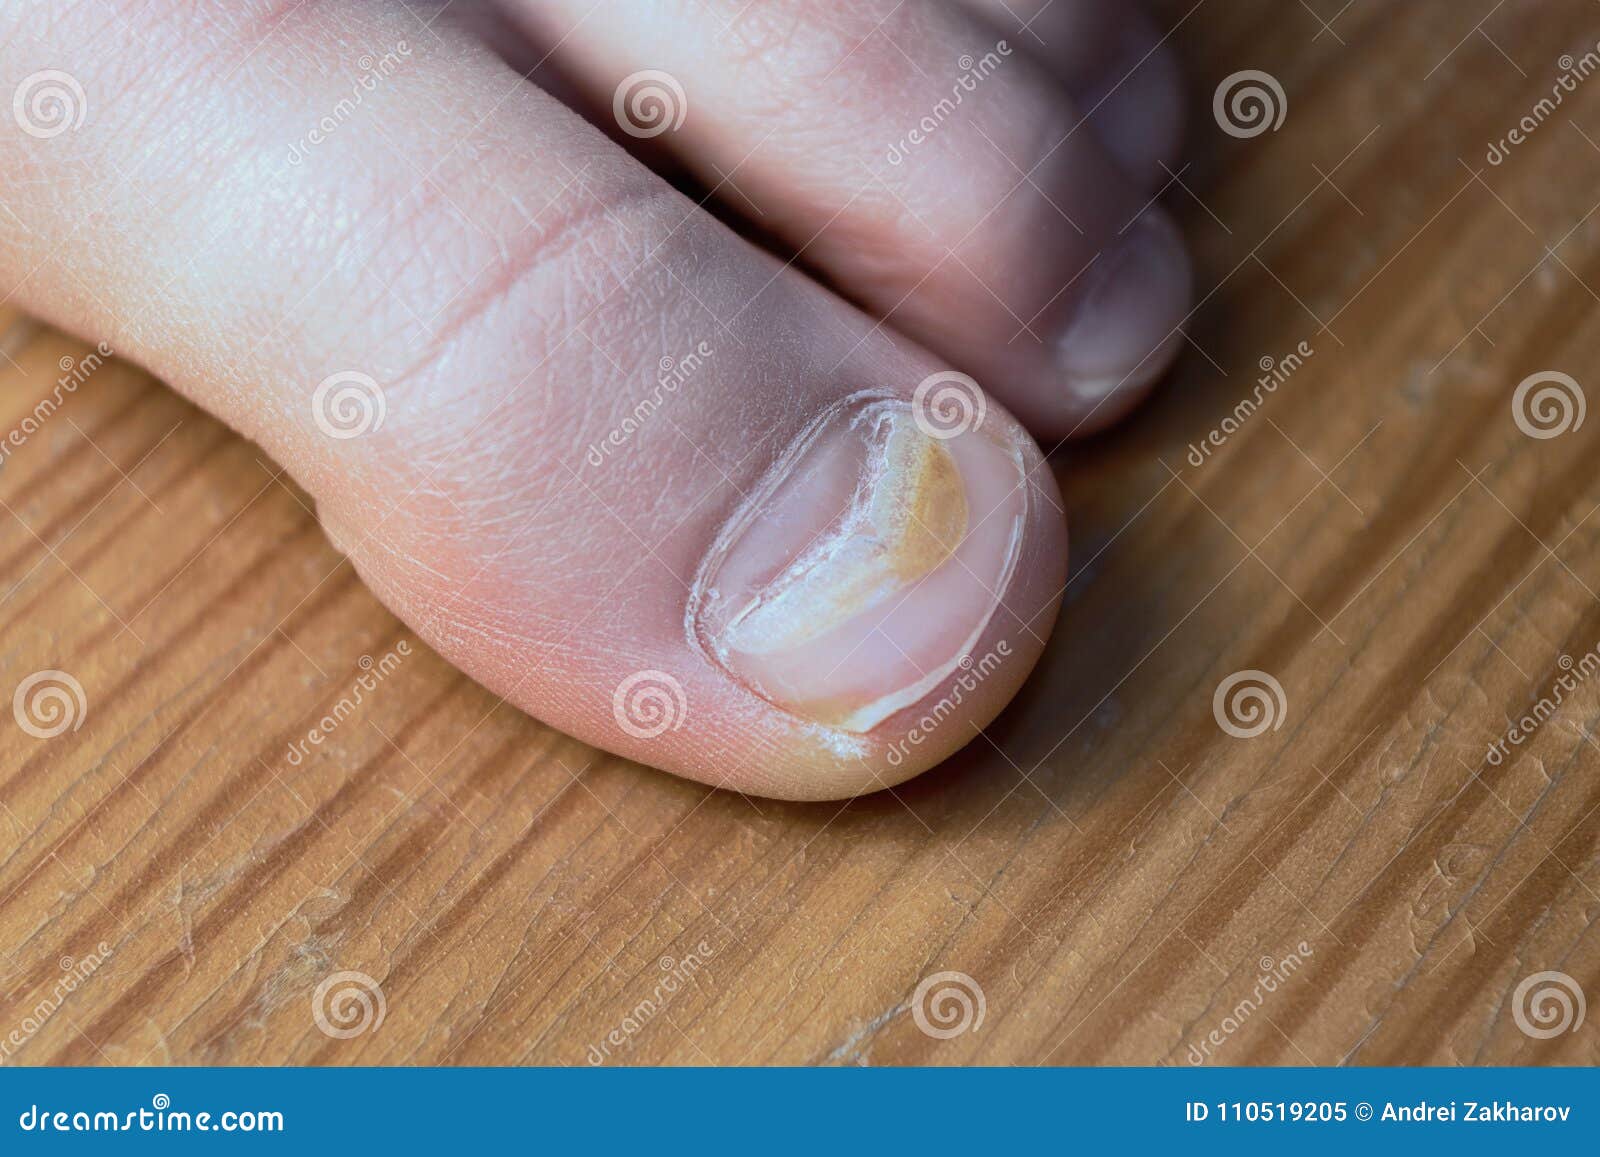 Effects of Enterovirus on the Body in the Form of Damage To the Thumb.  Stock Image - Image of human, growing: 110519205